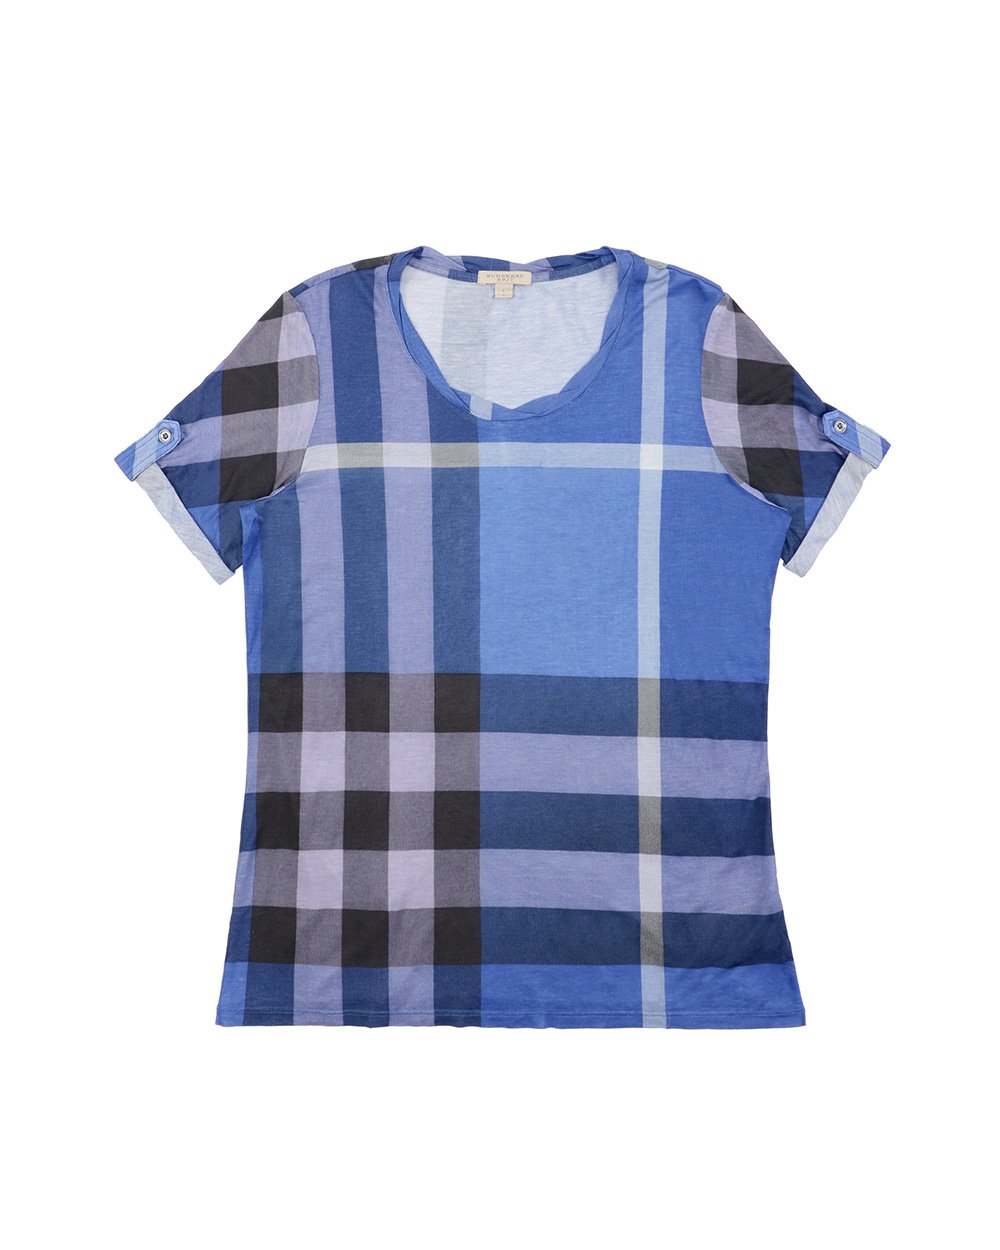 Cotton Short-Sleeves T-Shirt - ISSI Outlet